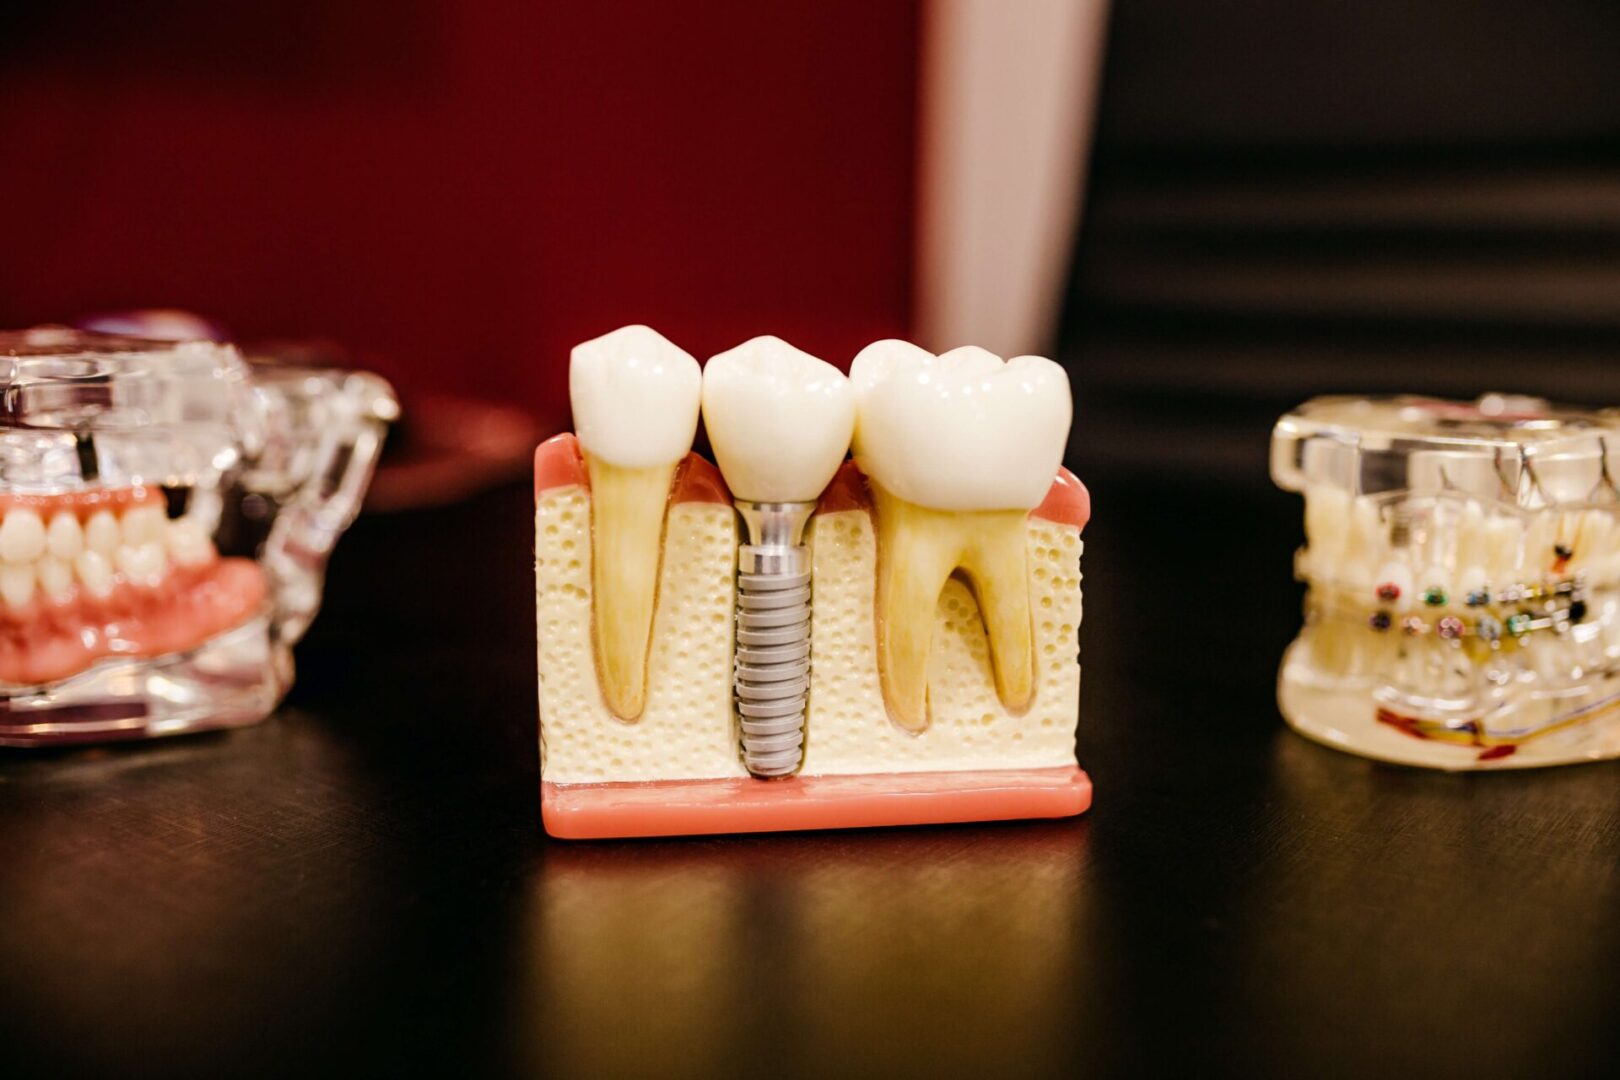 A tooth implant is placed in the middle of three teeth.